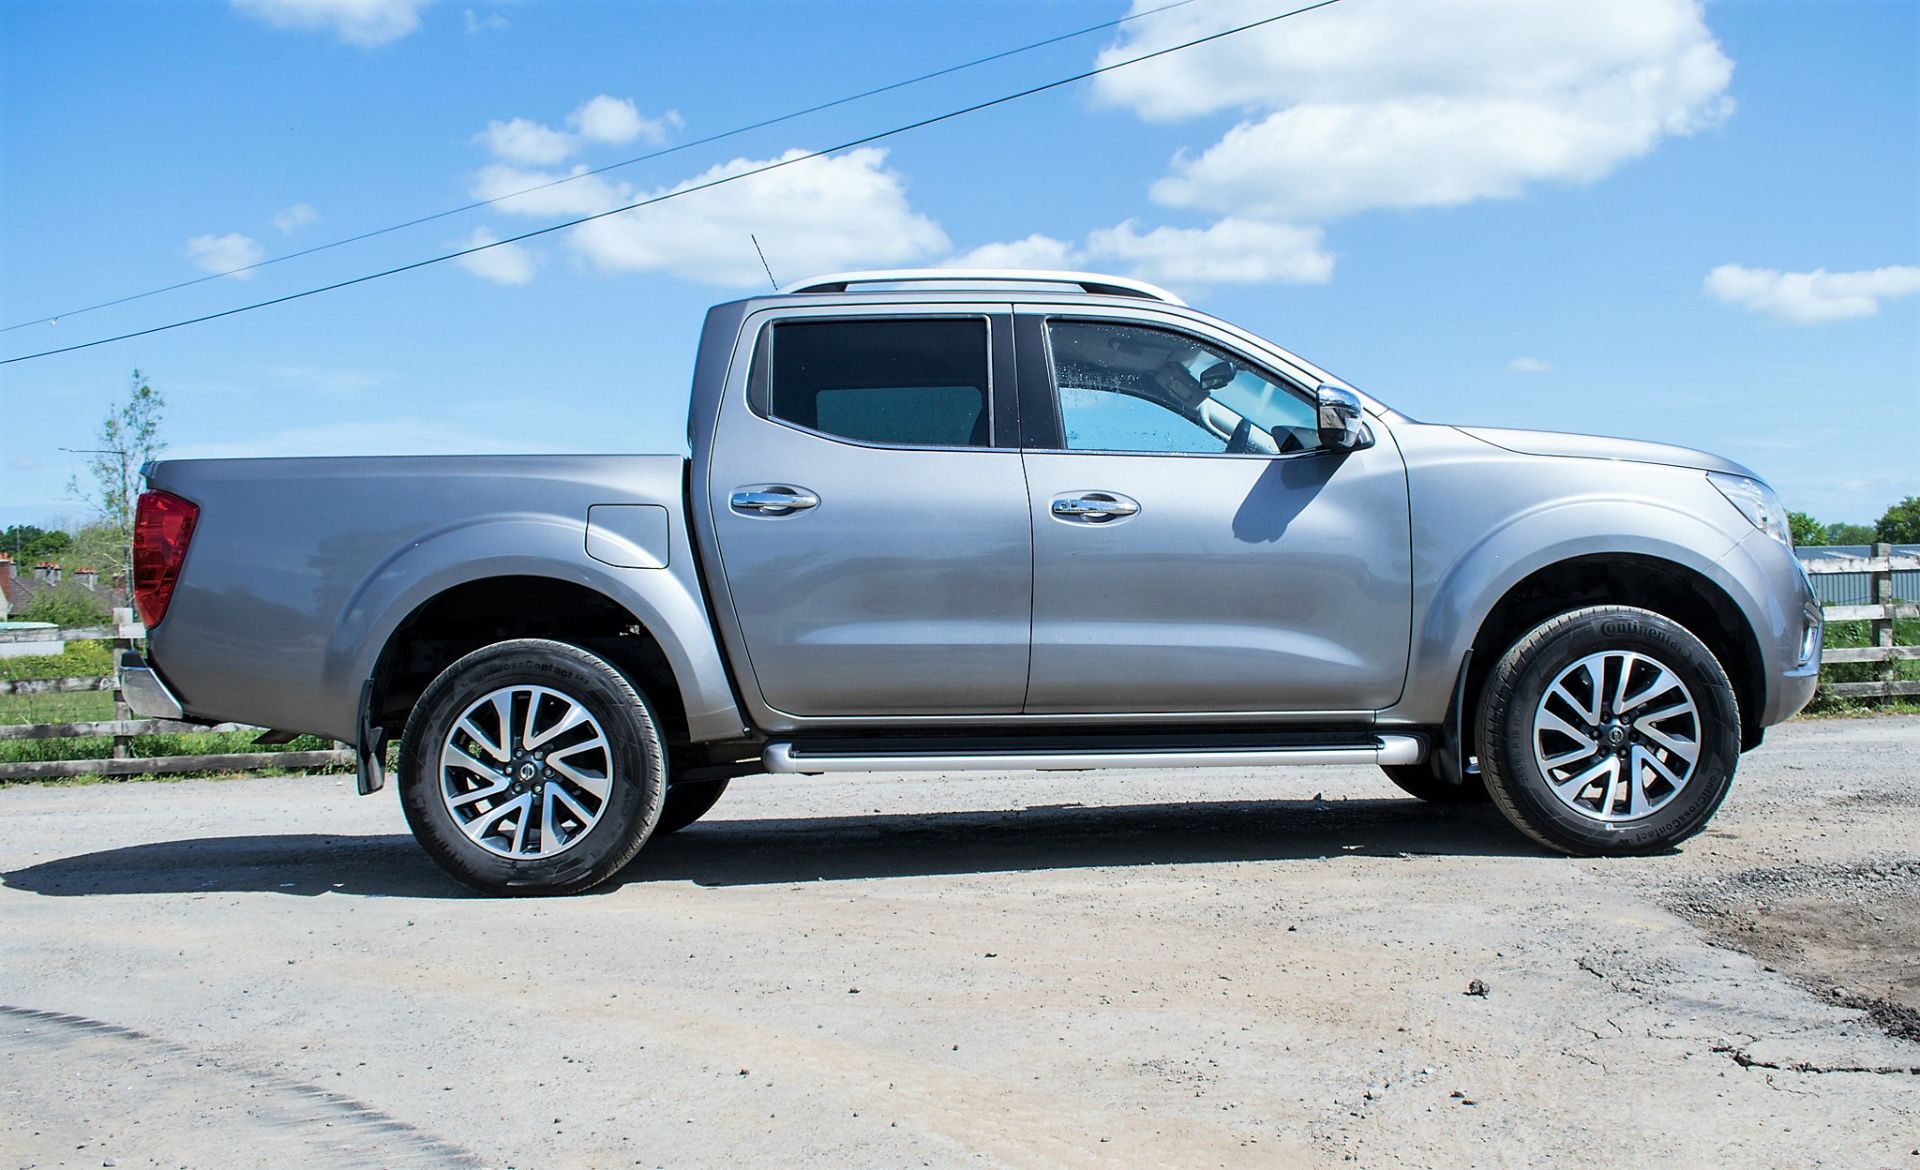 Nissan Navara Tekna DCi Auto double cab pick up truck Registration Number: BL68 LKM Date of - Image 7 of 25